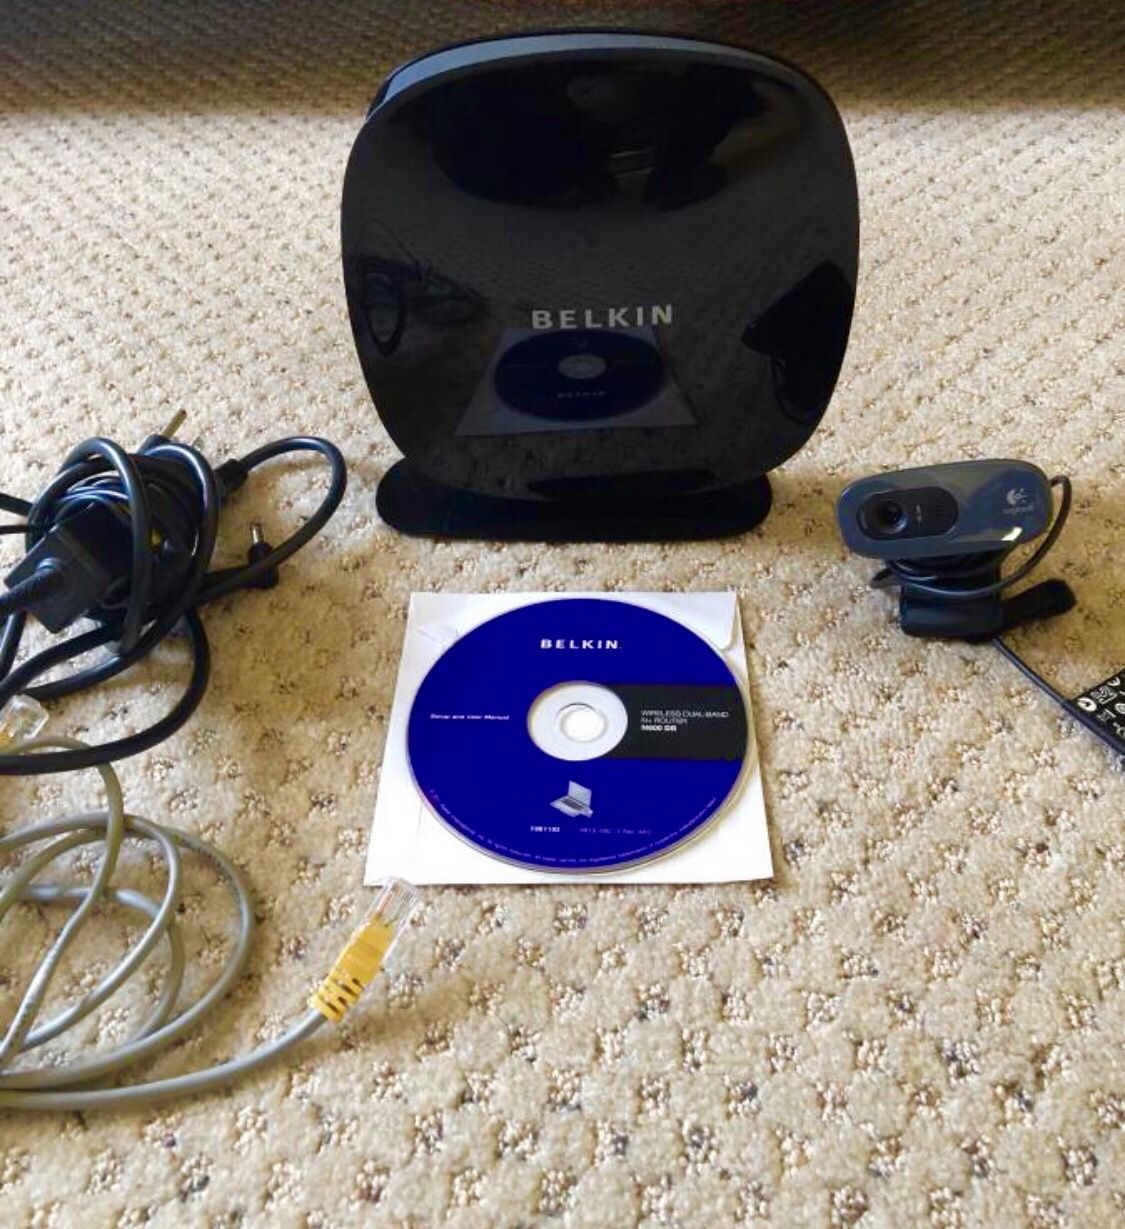 Used Belkin Wireless Dual Band 600 DB Router. Camera Logitech is free with purchase. For detailed information please go on {url removed}. Excellent